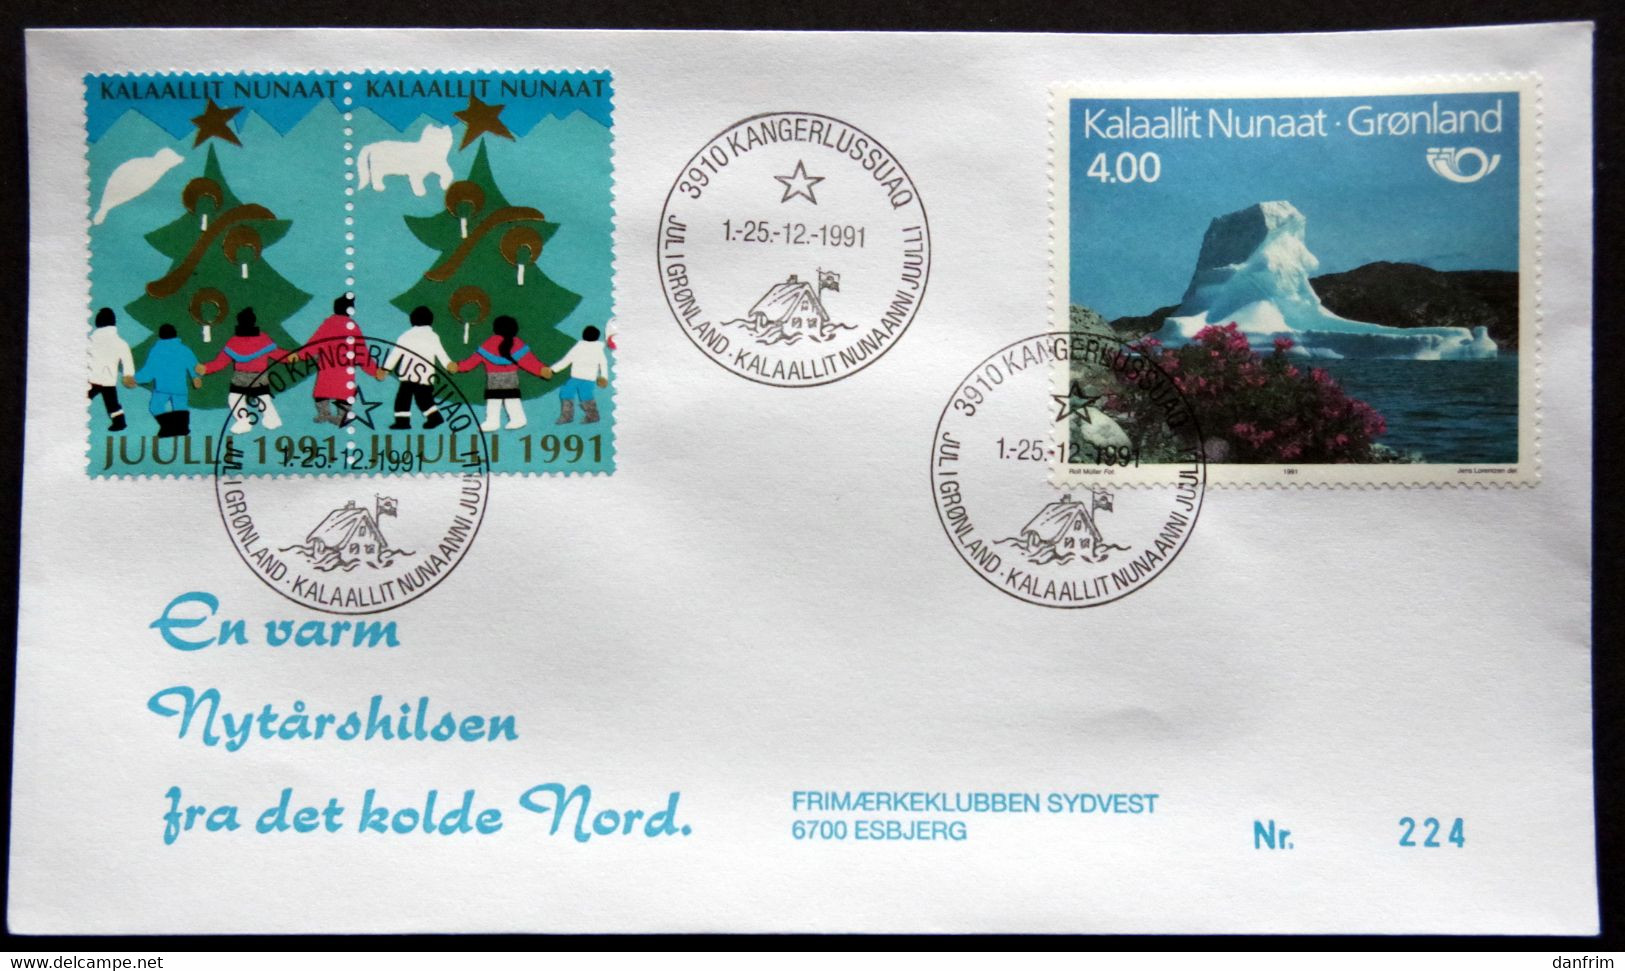 Greenland 1991 Cover  Minr.217  KANGERLUSSUA   (lot  805 ) - Covers & Documents